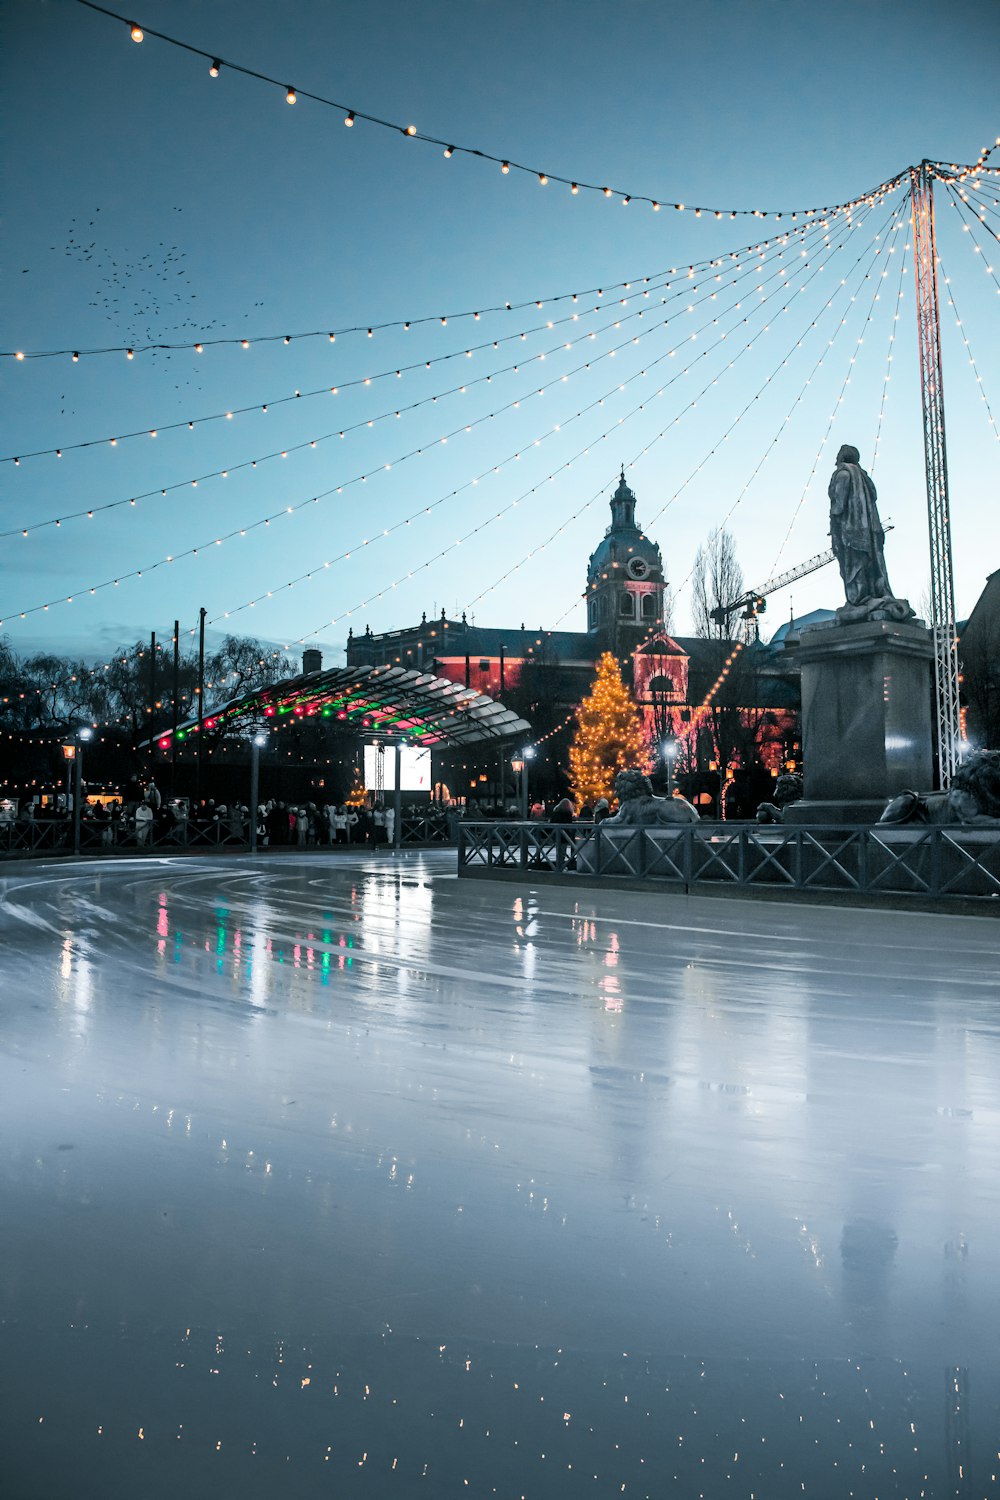 a skating rink with lights and buildings in the background